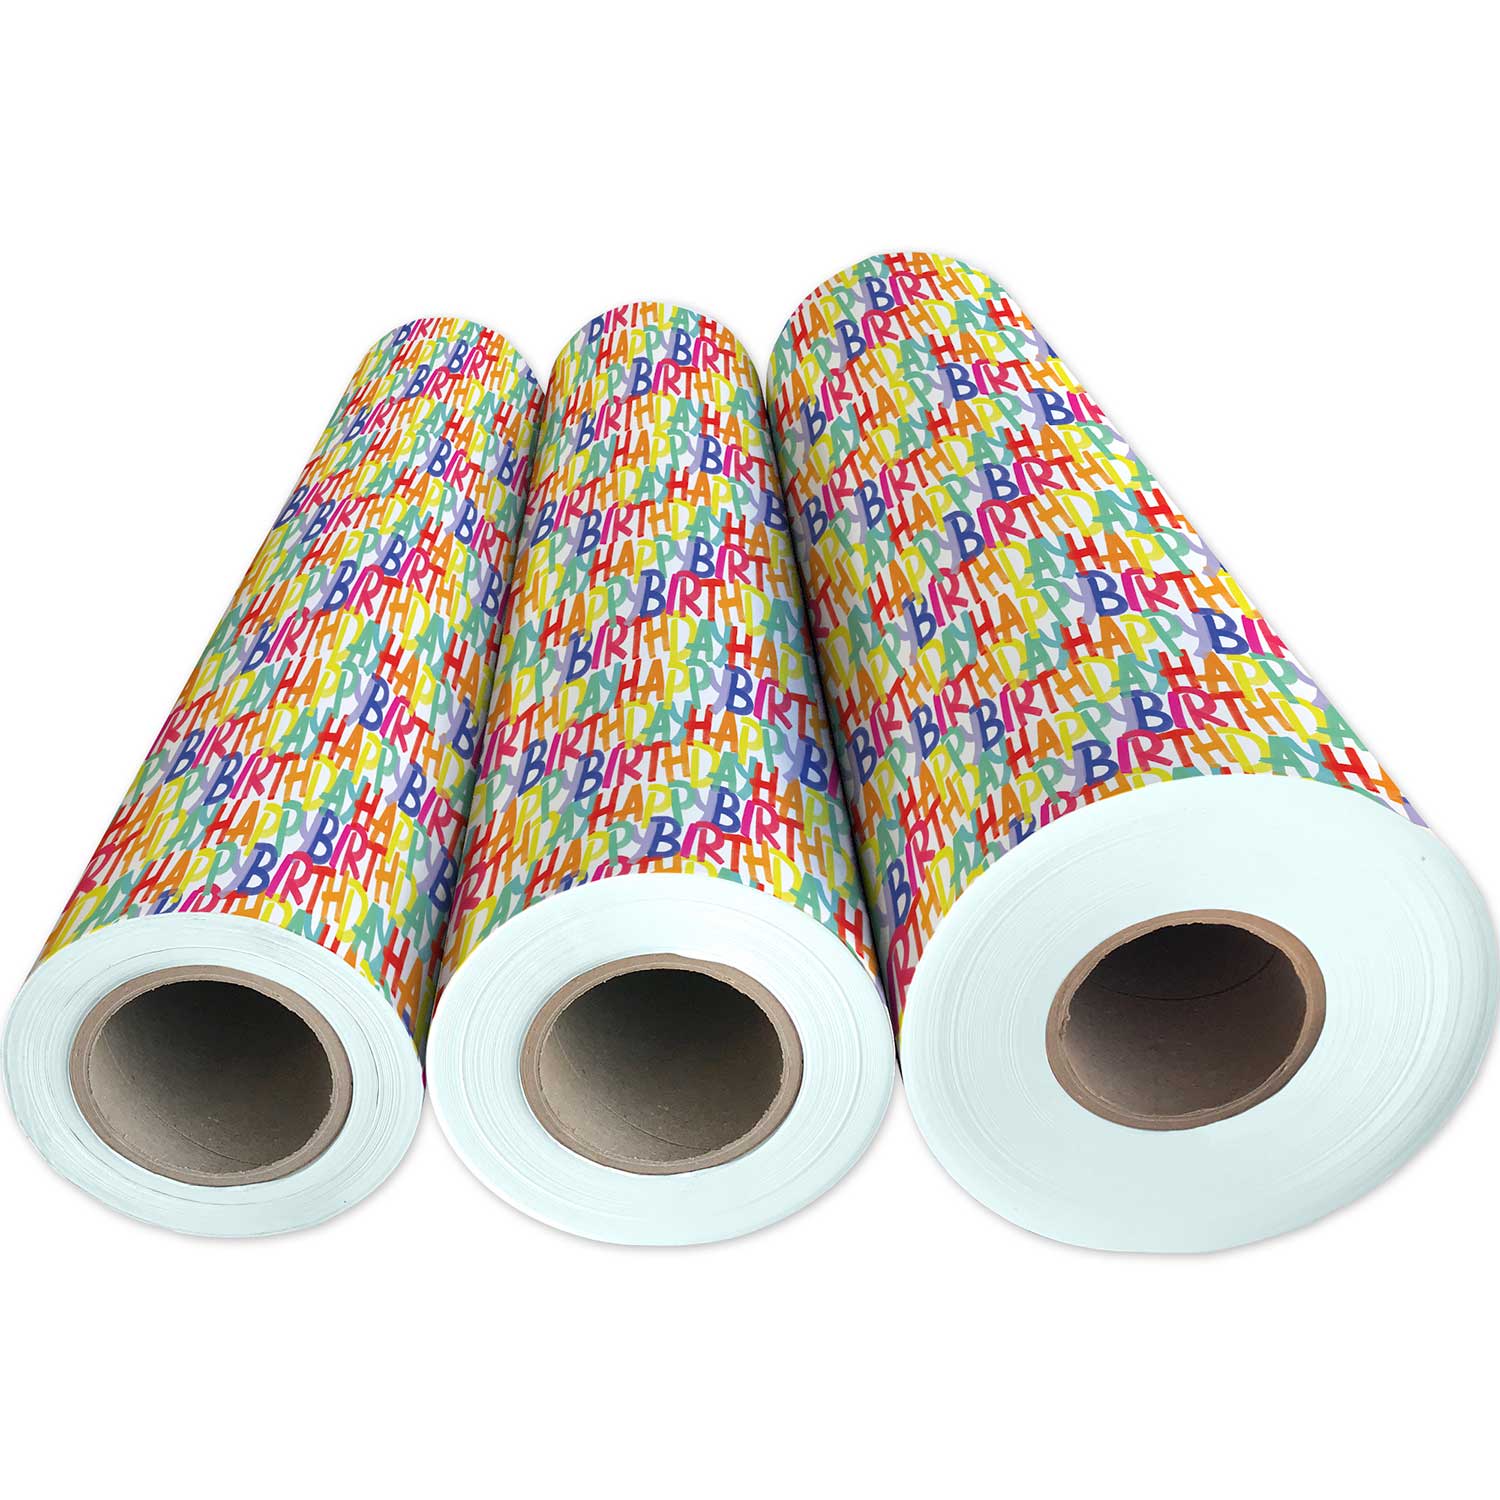 Happy Birthday Rainbow Glick Tissue Wrapping Paper 4 sheets 50 x 75 cm  folded into a pack